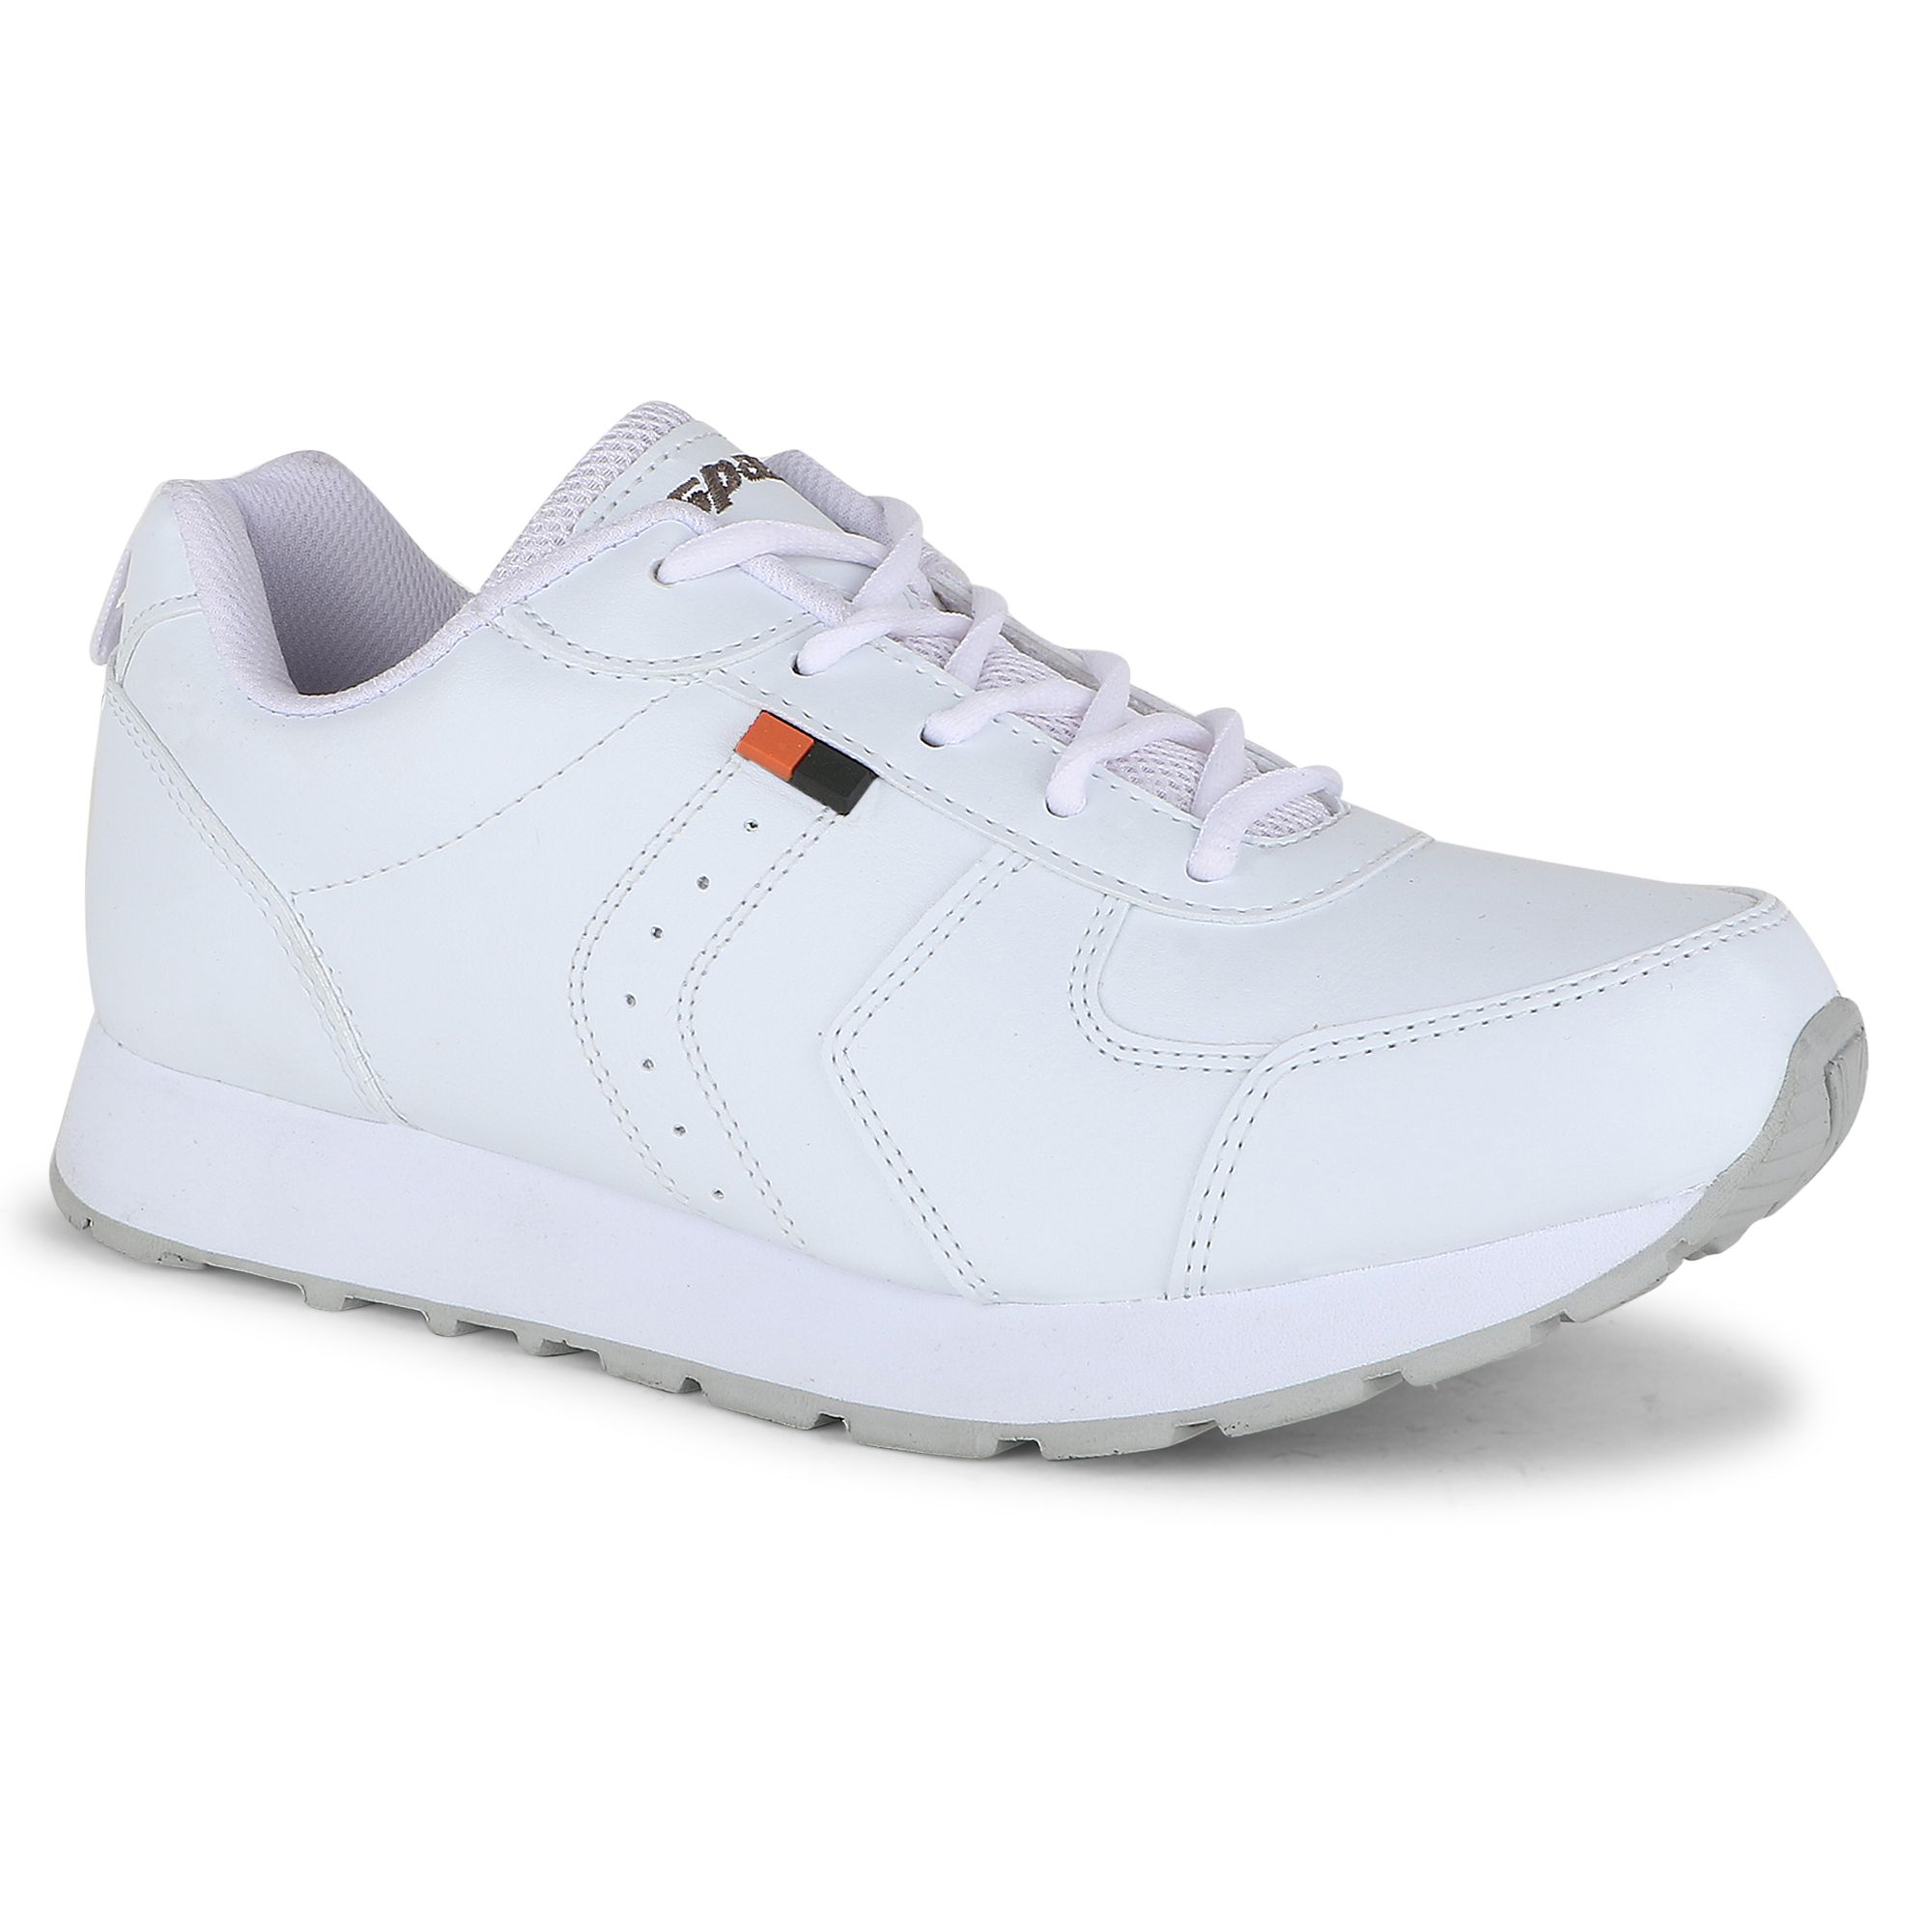 Sparx SM-9019 White Running Shoes - Buy 